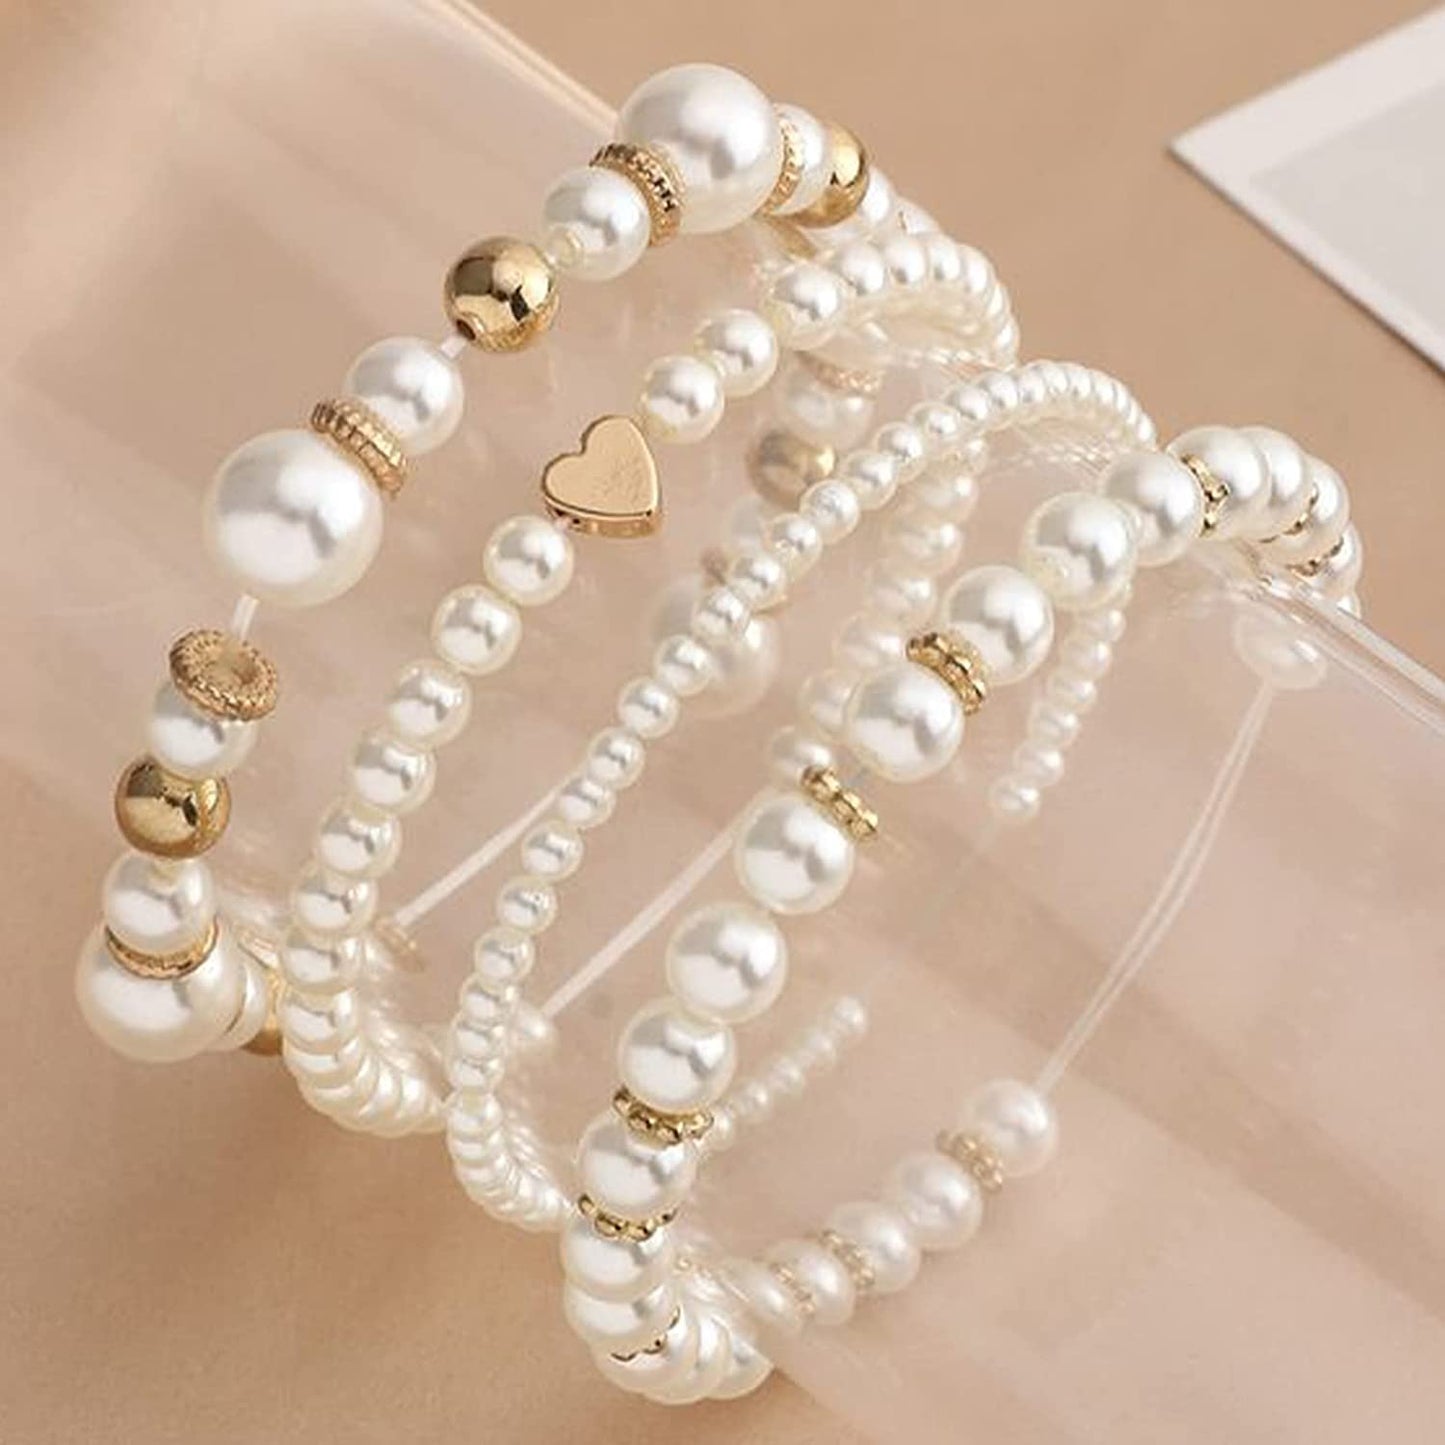 Round Non-peeling ABS Pearls with Holes